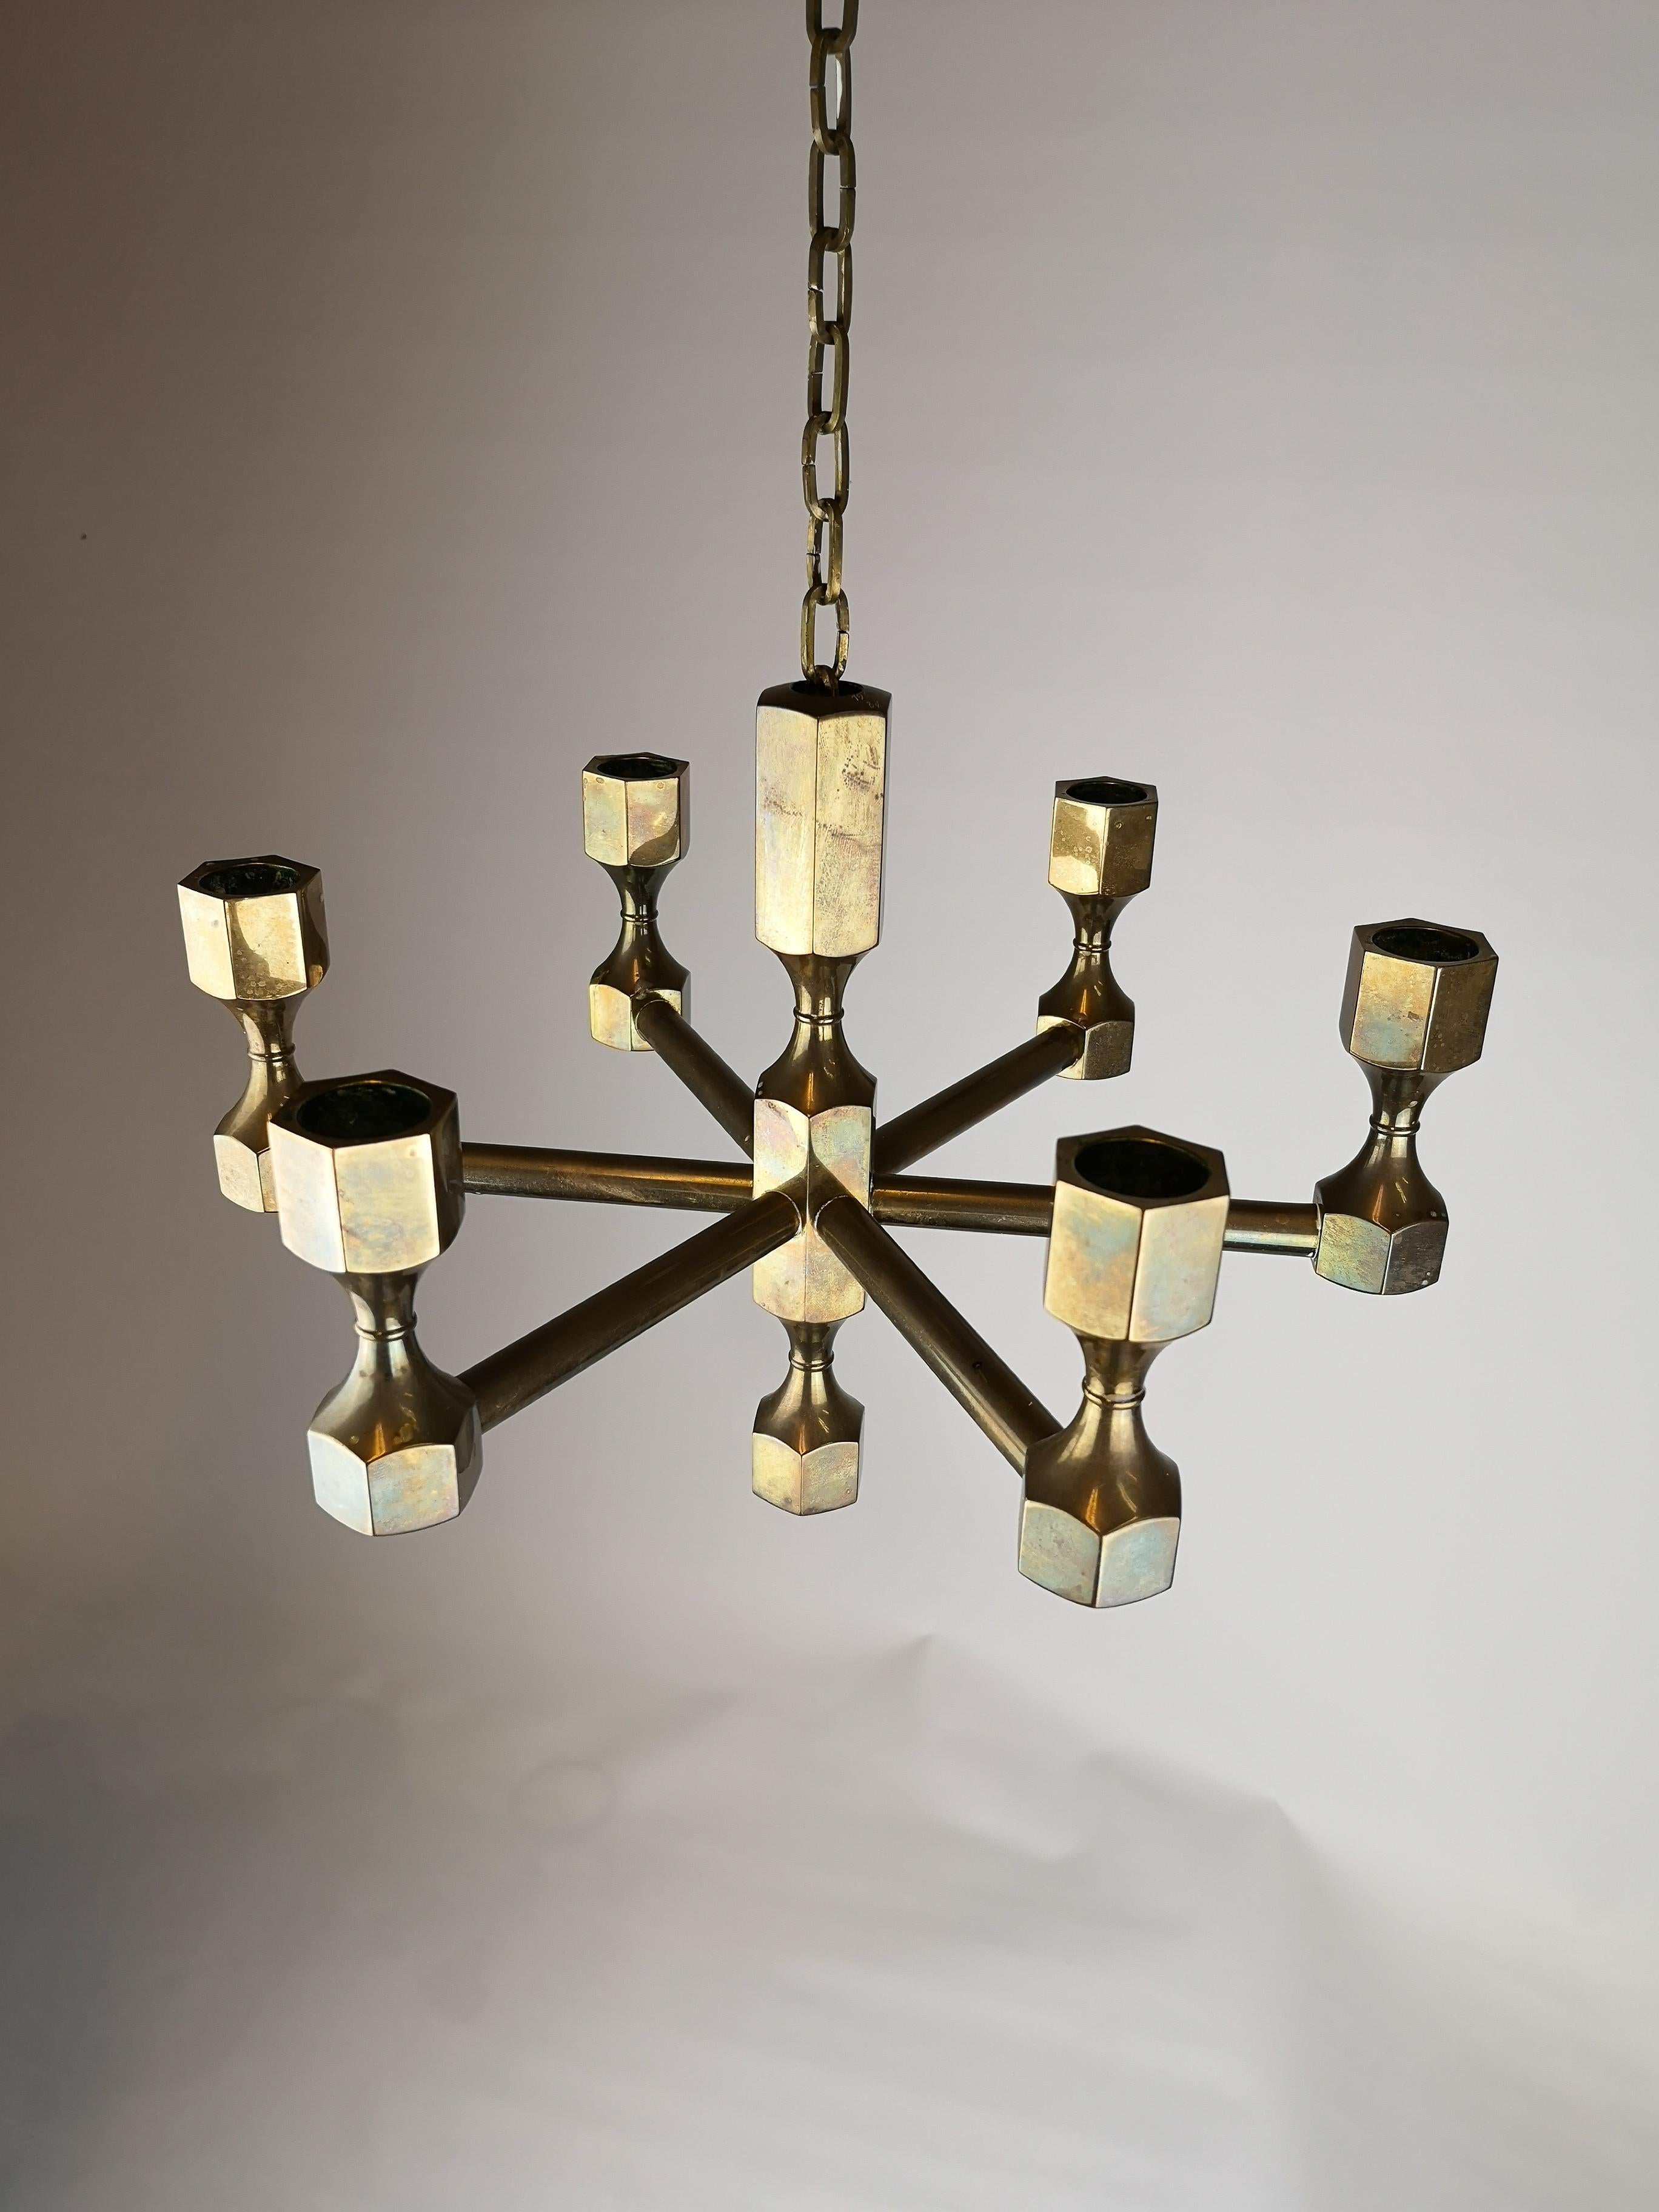 Gusum brass chandelier for six candles. Wonderful in solid brass is this chandelier made in Sweden in the 1970s. In good condition and it is singed on the top of the chandelier.

Measures: 32 cm. x 24 cm.